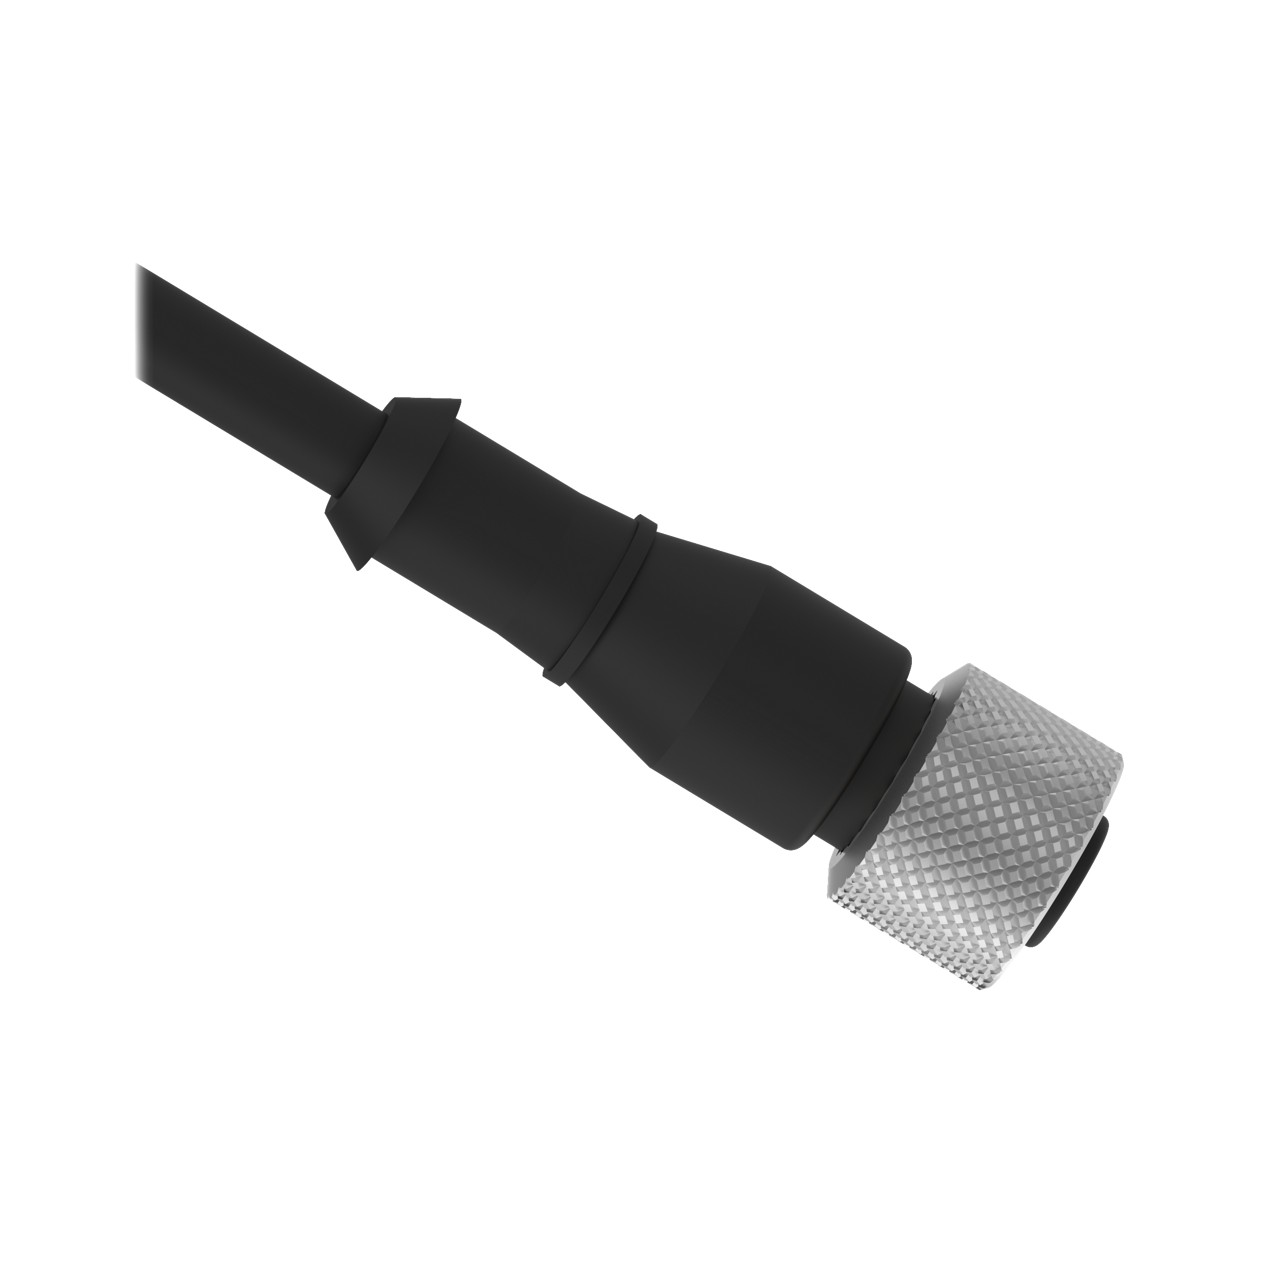 MQDC-4150 - Cordset A-Code M12 Single Ended; 4-pin Straight Female Connector; 45.7 m (149.9 ft) in Length; Black PVC Jacket, Nickel-Plated Brass Nut